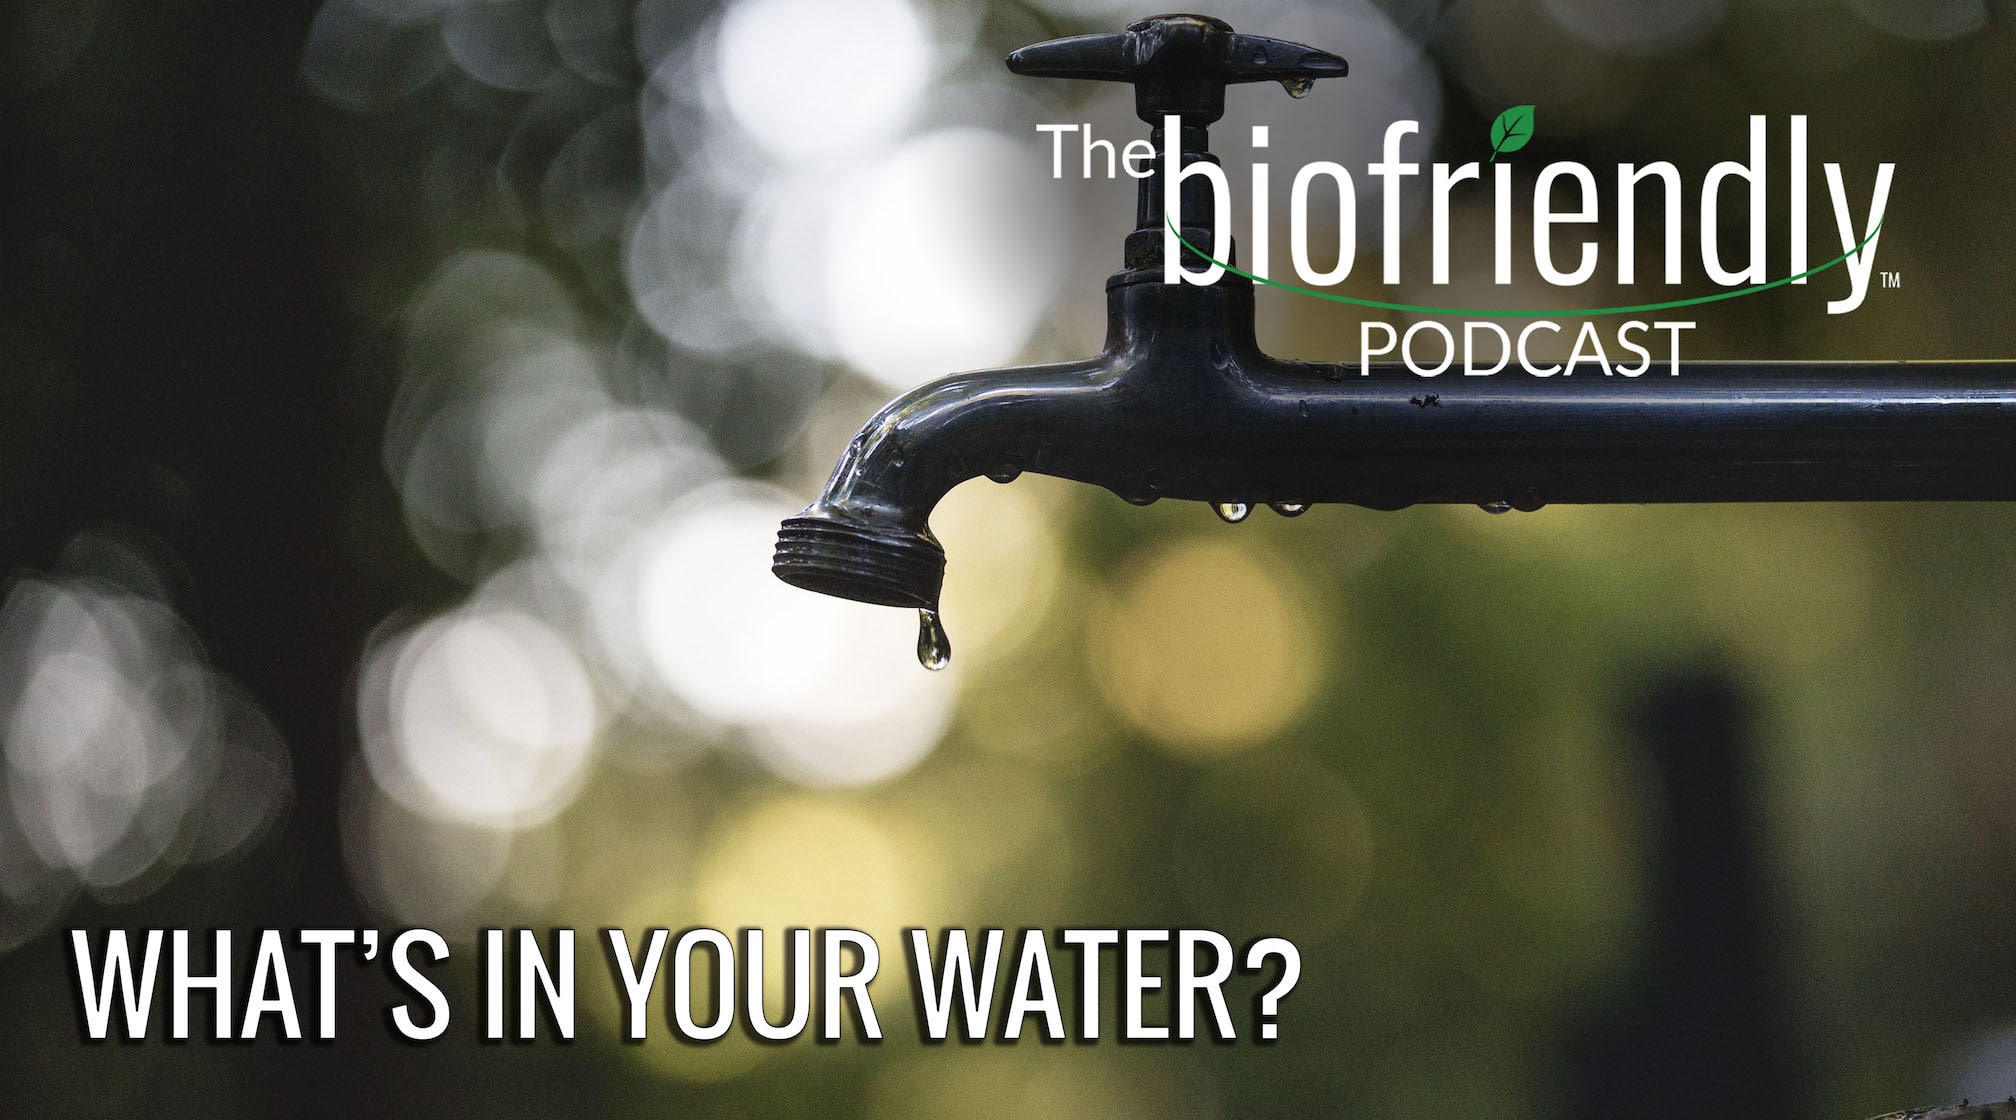 The Biofriendly Podcast - Episode 74 - What's In Your Water?